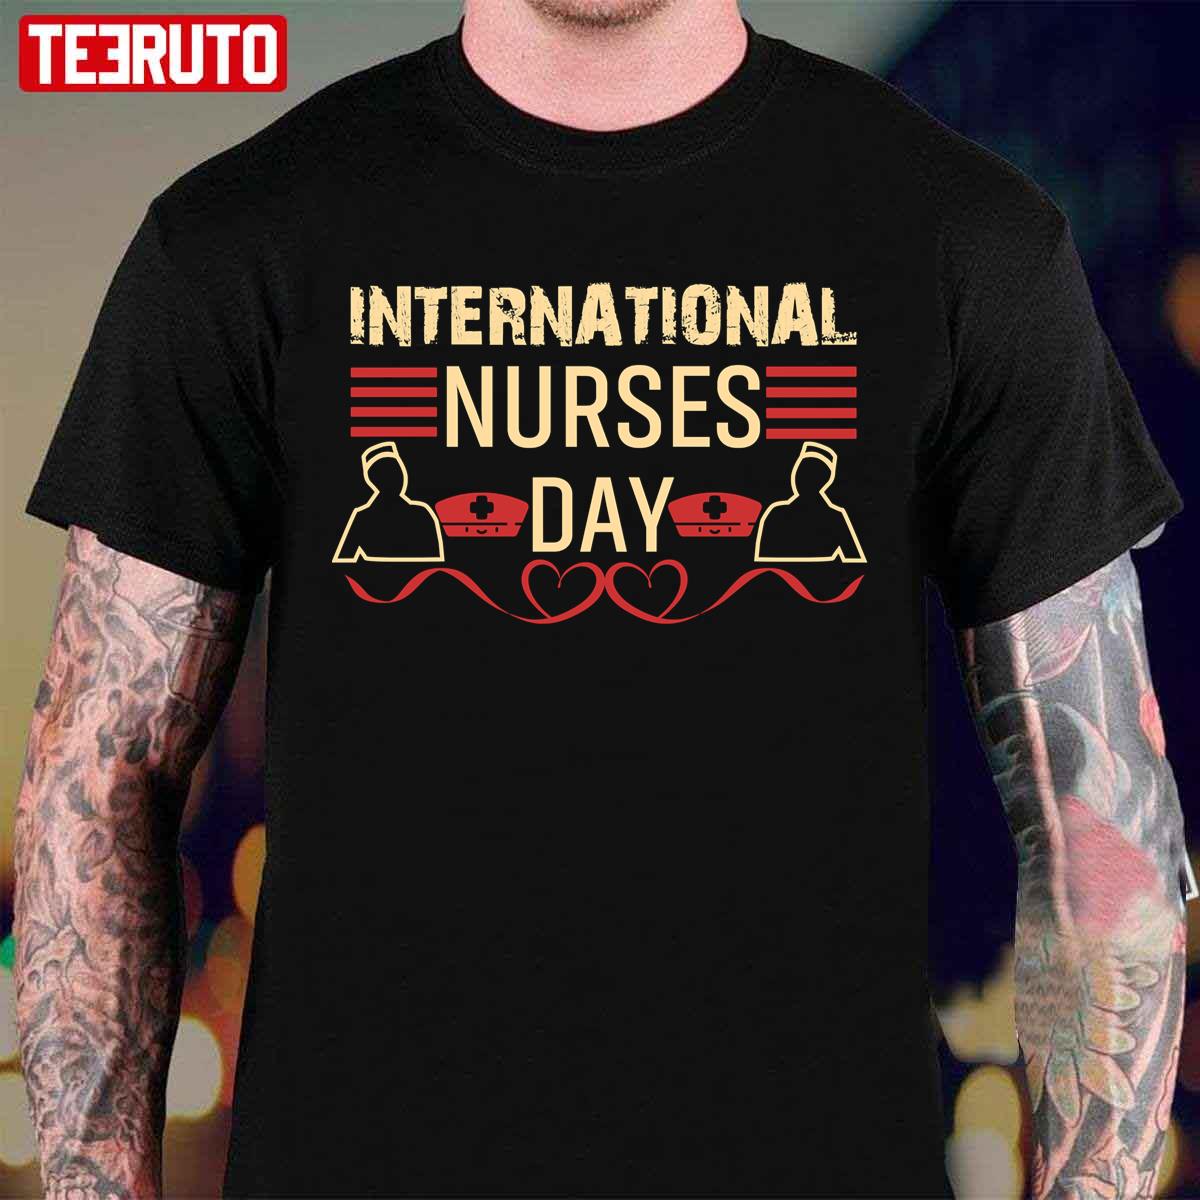 Handmaids Tale Unisex T-Shirt May Day